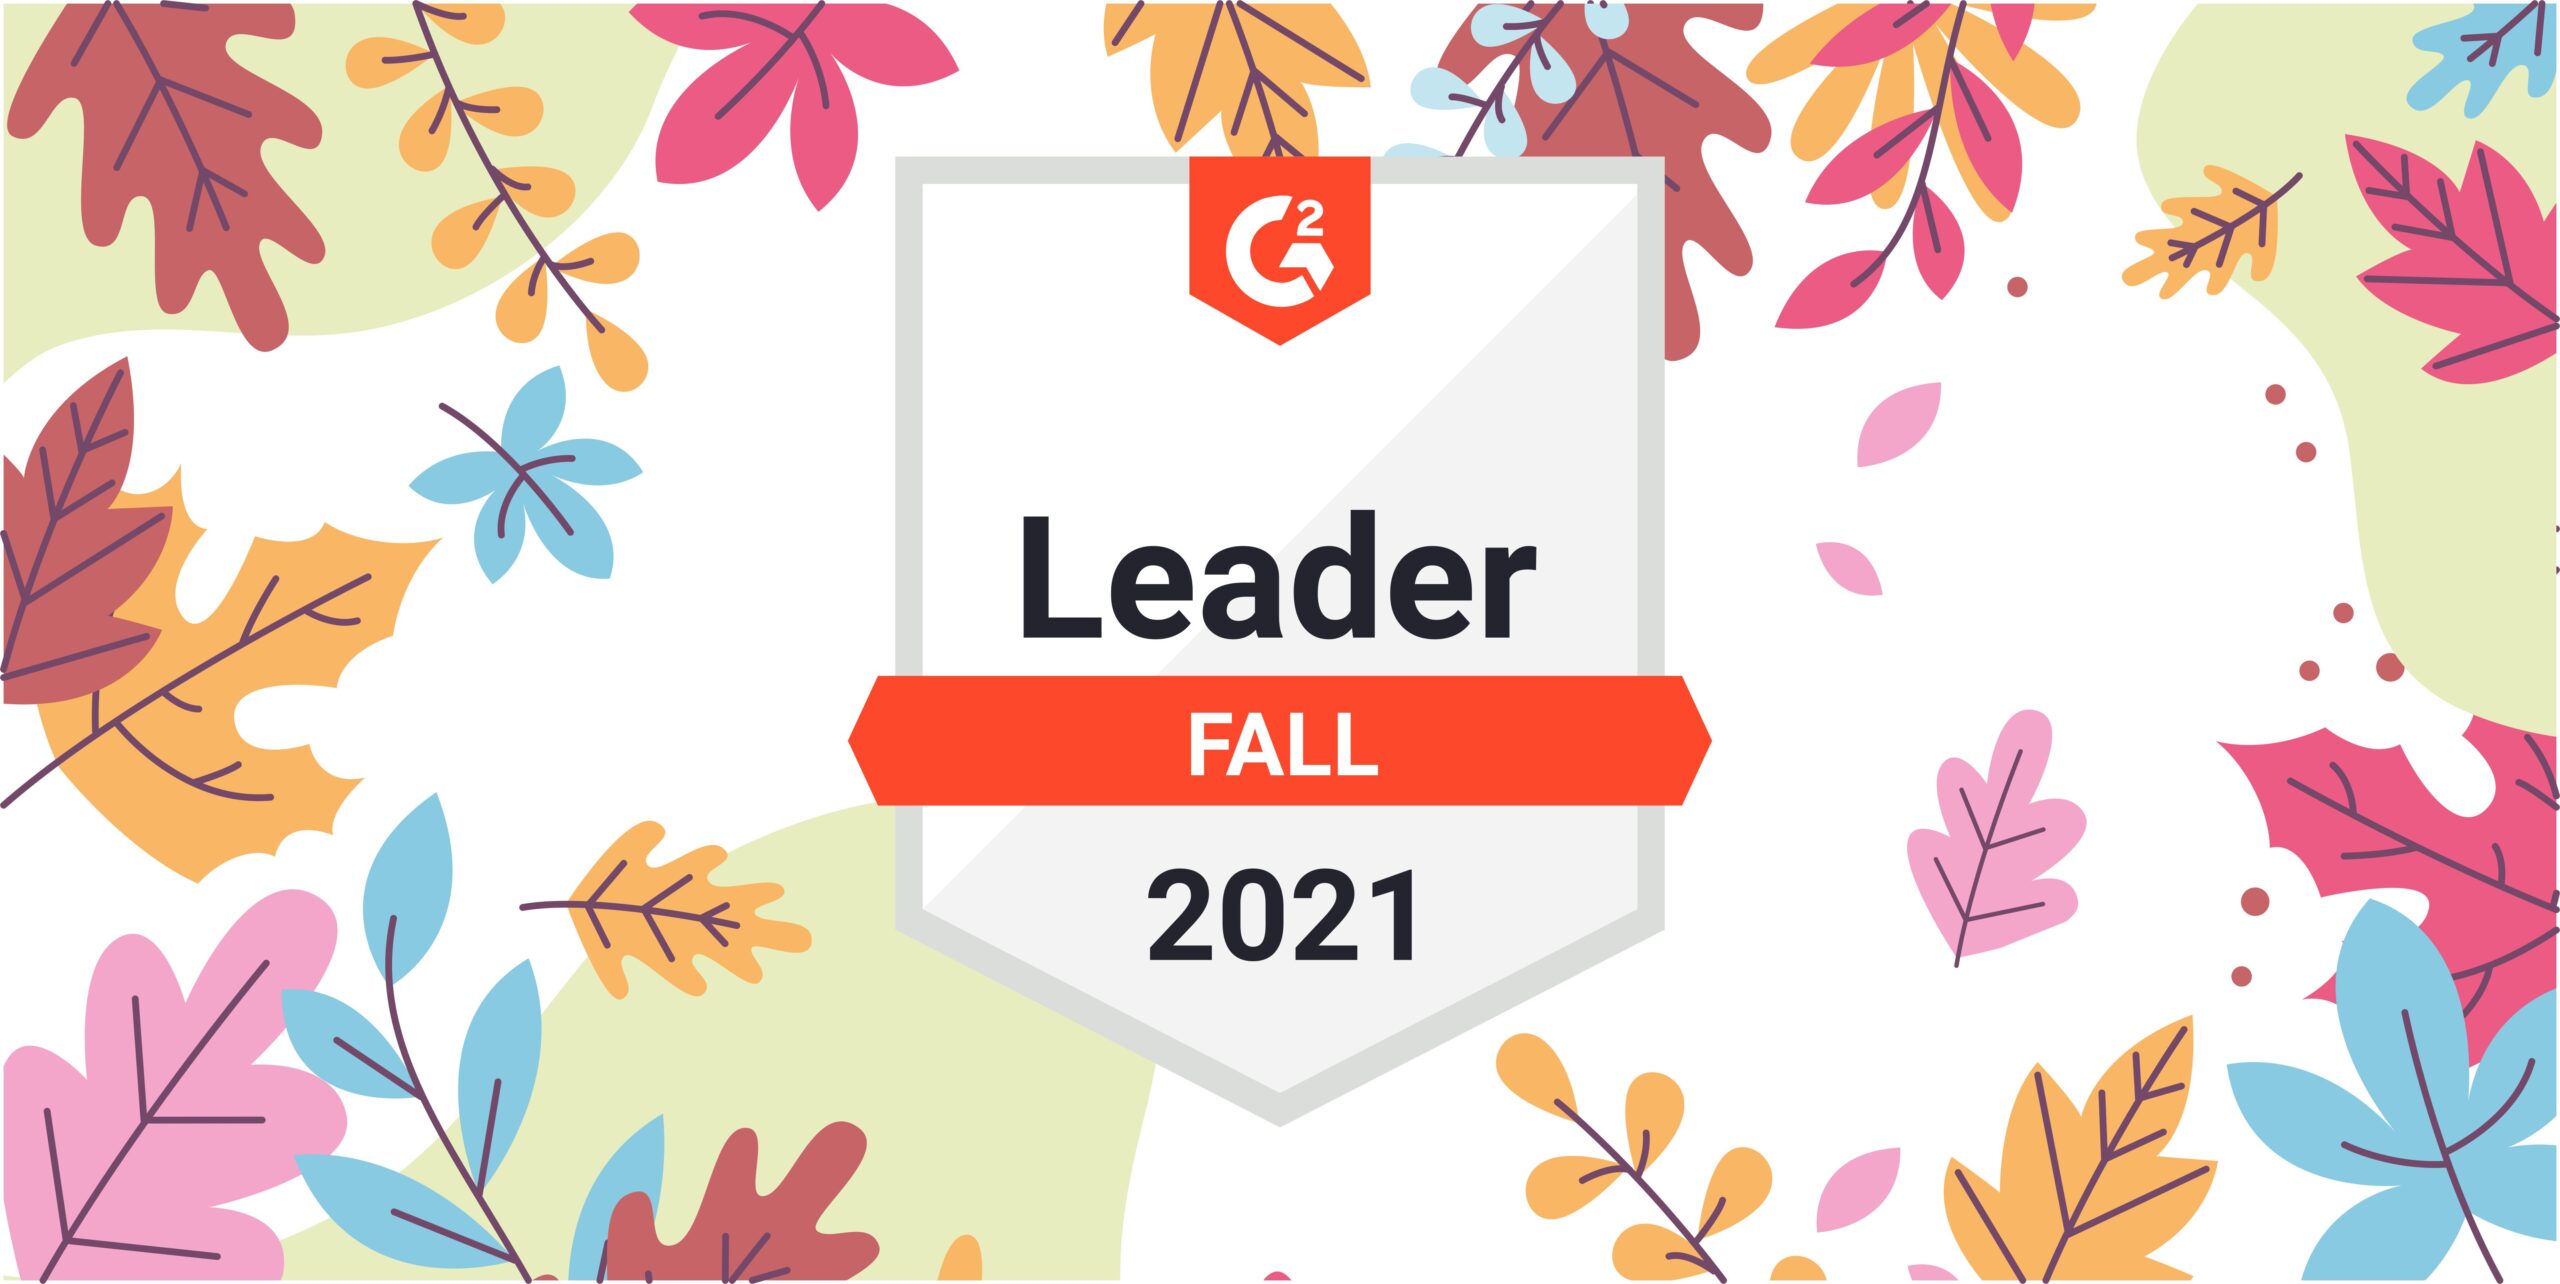 Snov.io Recognized Among Fall 2021 Leaders According To G2